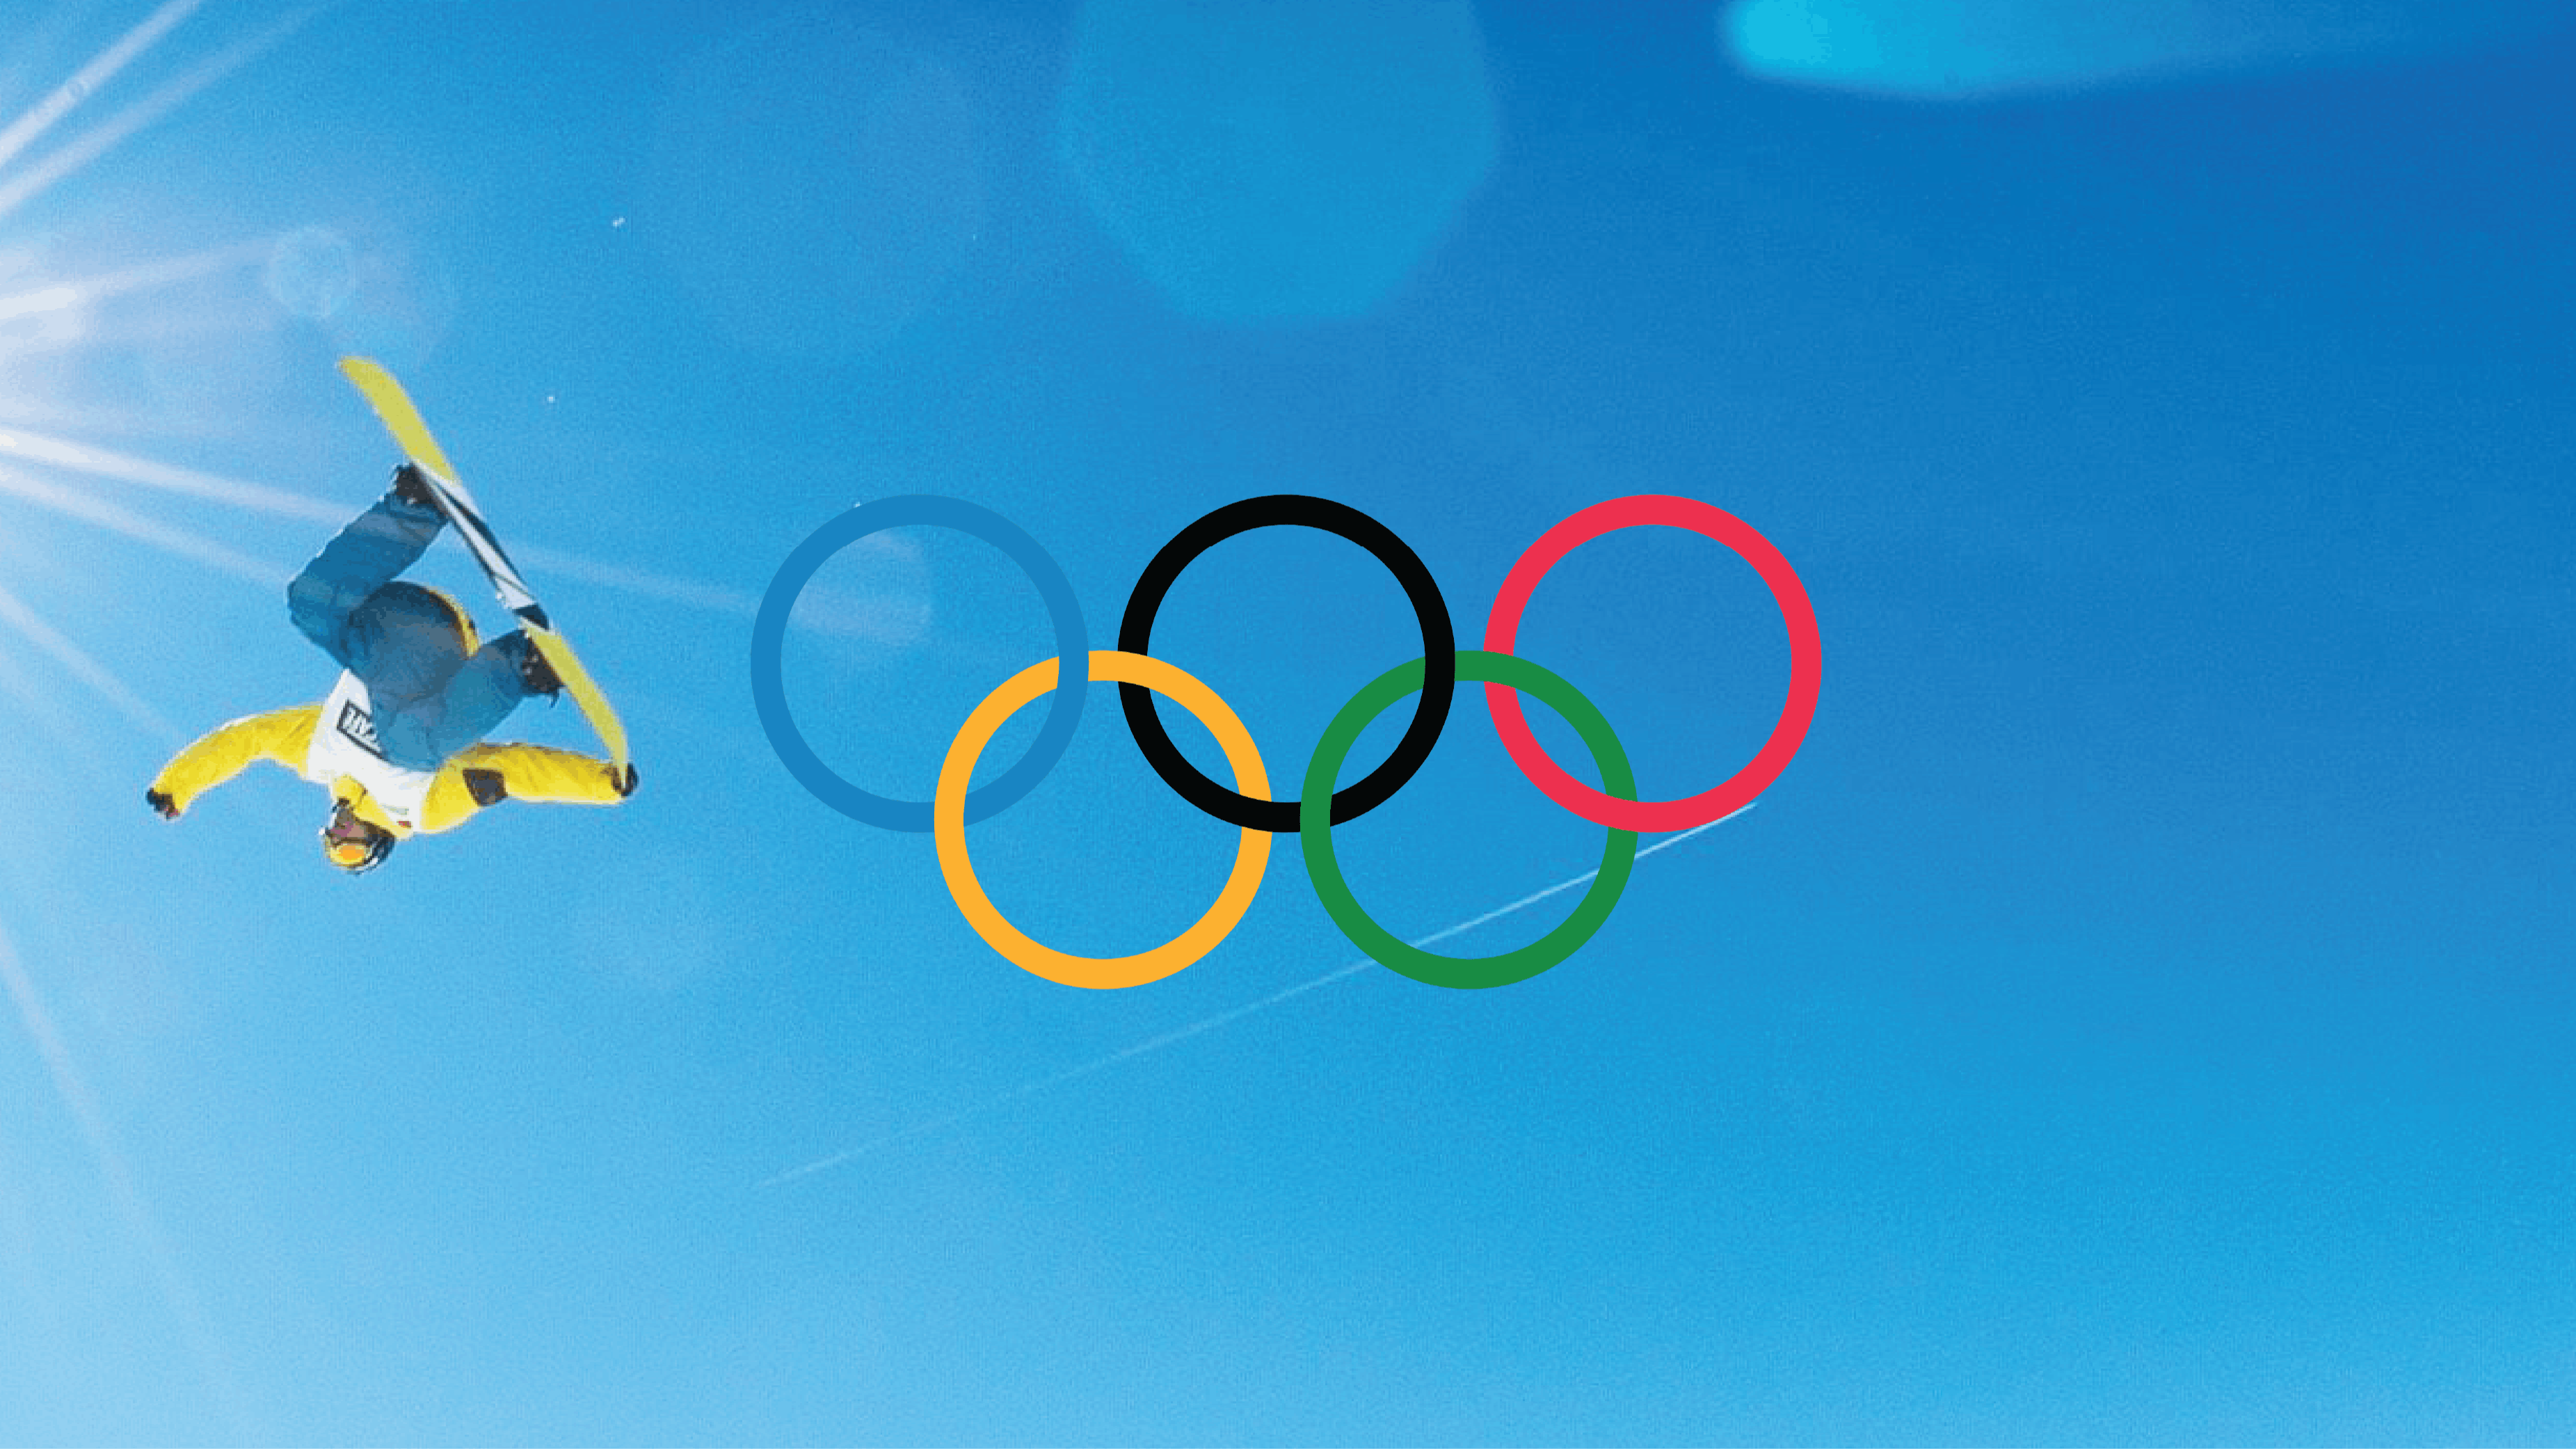 A snowboarder jumps upside down and grabs his board on a blue-sky, sunny day. The Olympic rings are added on top. 